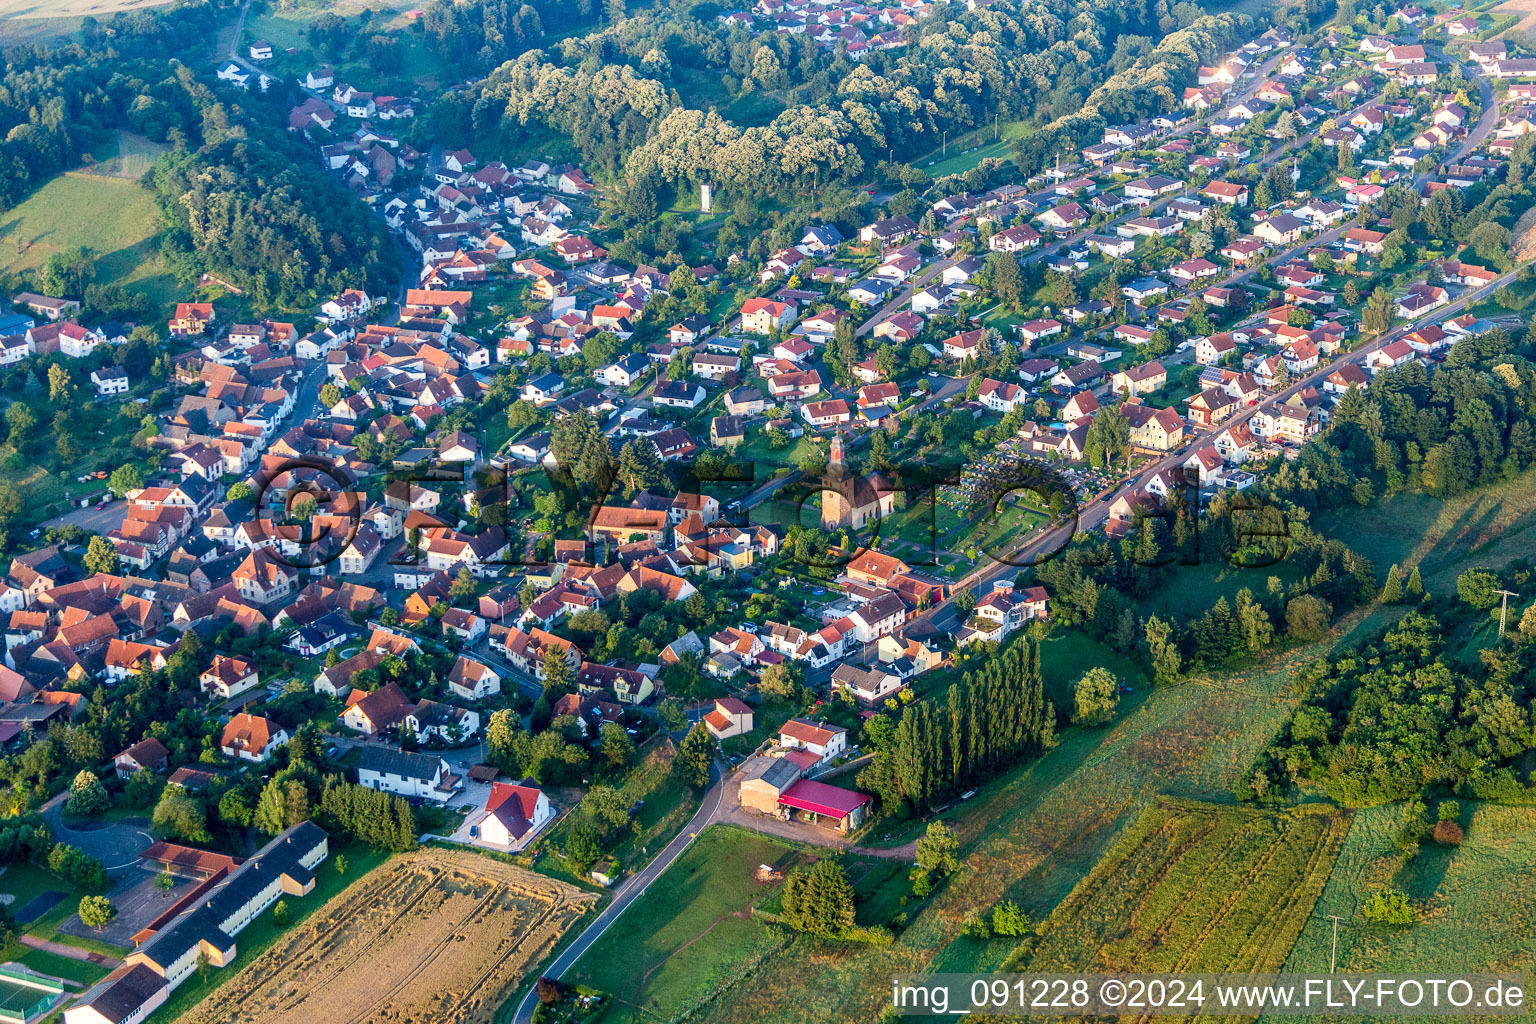 Village - view on the edge of agricultural fields and farmland in Sippersfeld in the state Rhineland-Palatinate, Germany